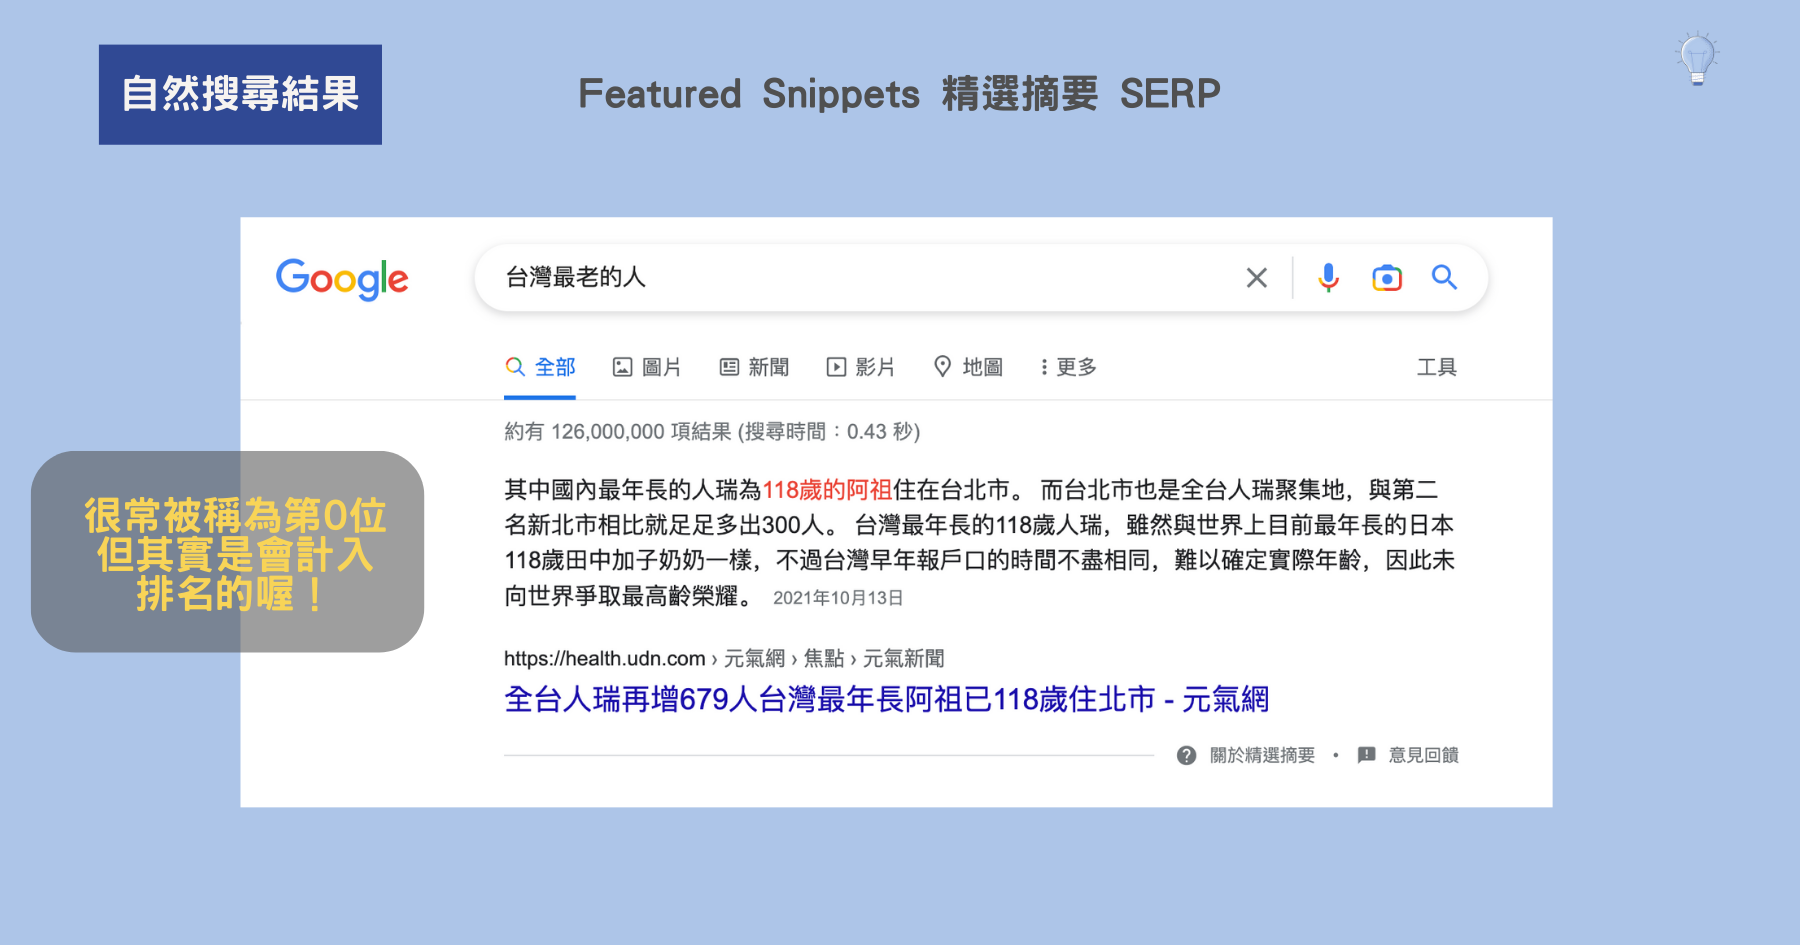 Featured Snippets 精選摘要 SERP